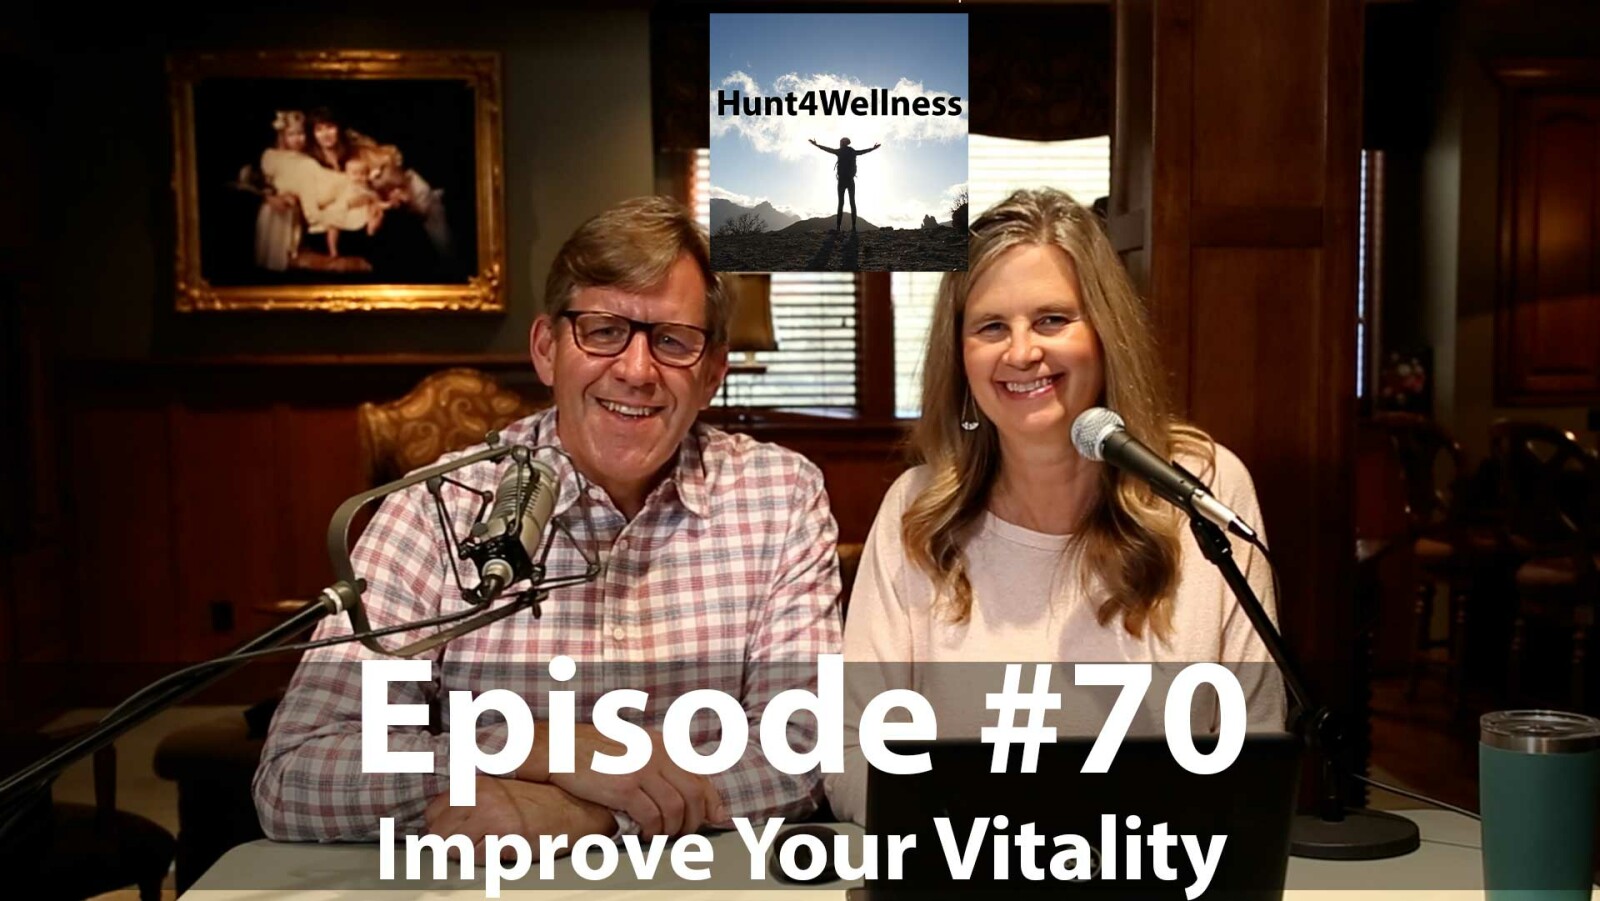 Episode #70 - Improve Your Vitality